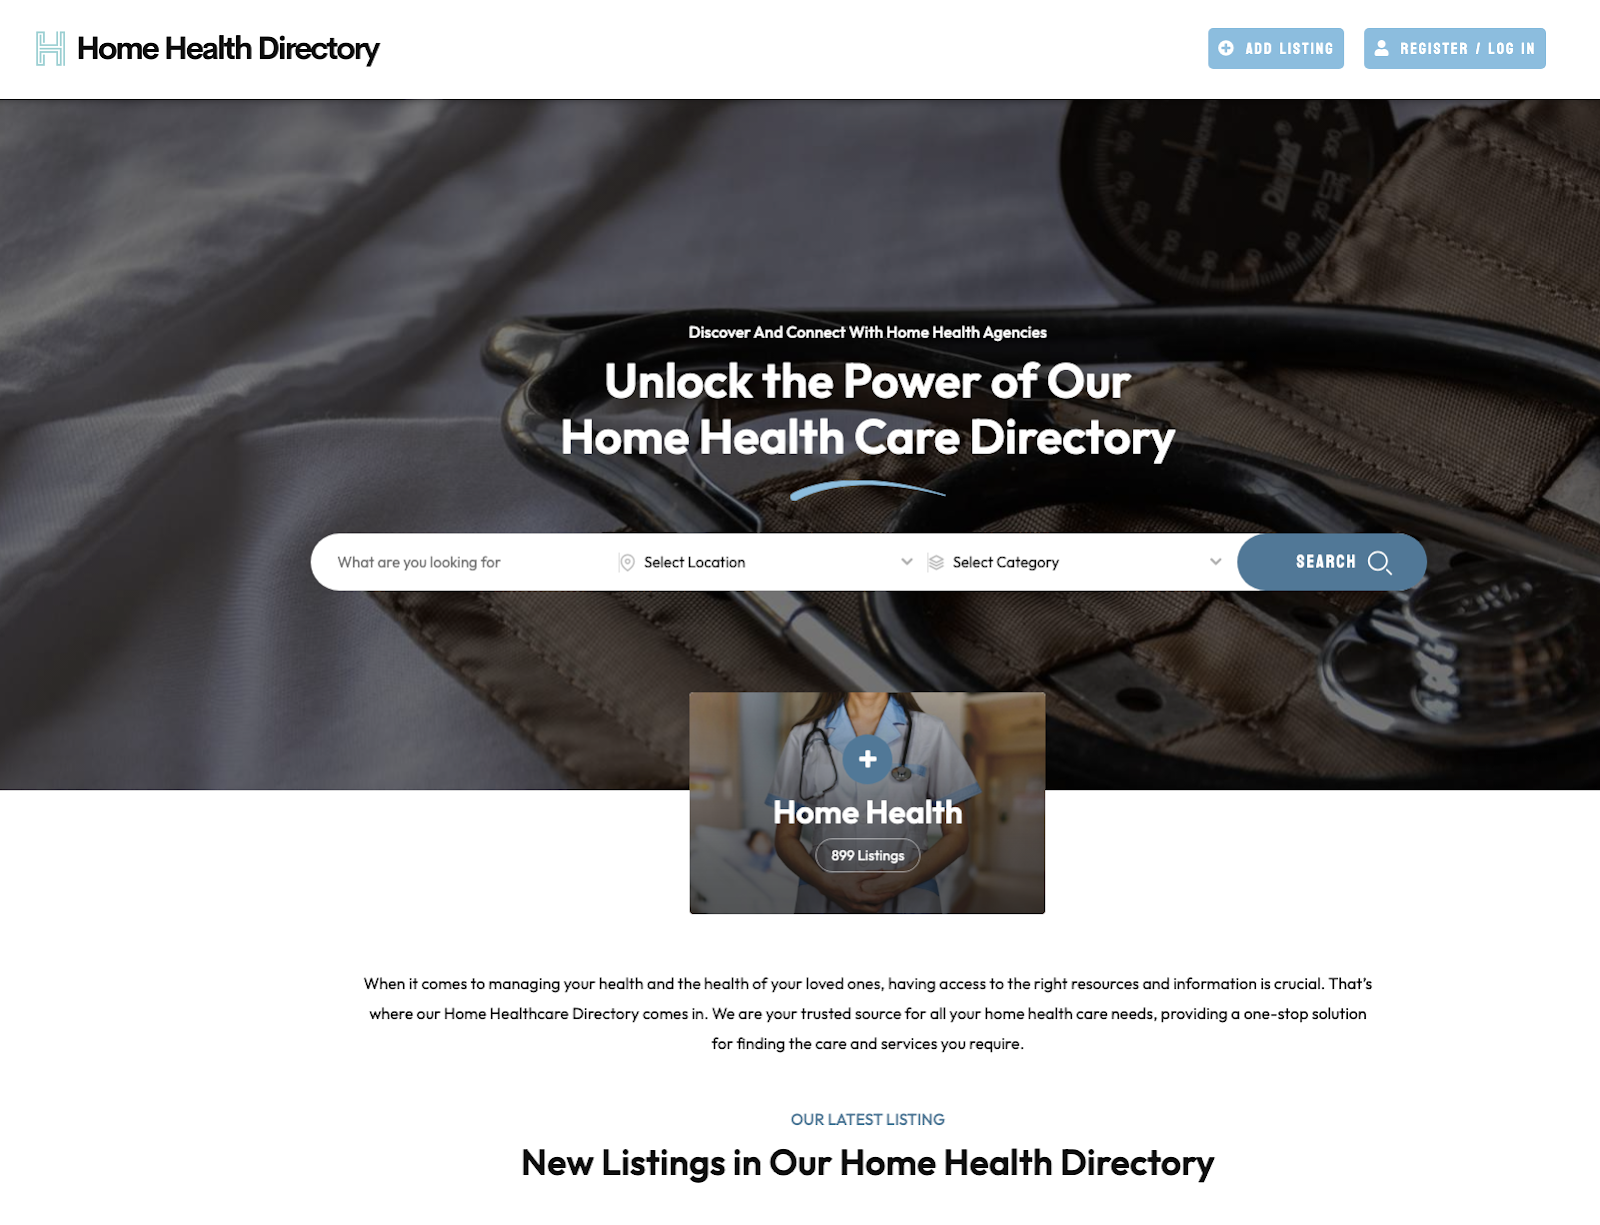 Home Health Directory Emerges as the Premier Search Resource for Top-notch Home Health Care Agencies Across the United States